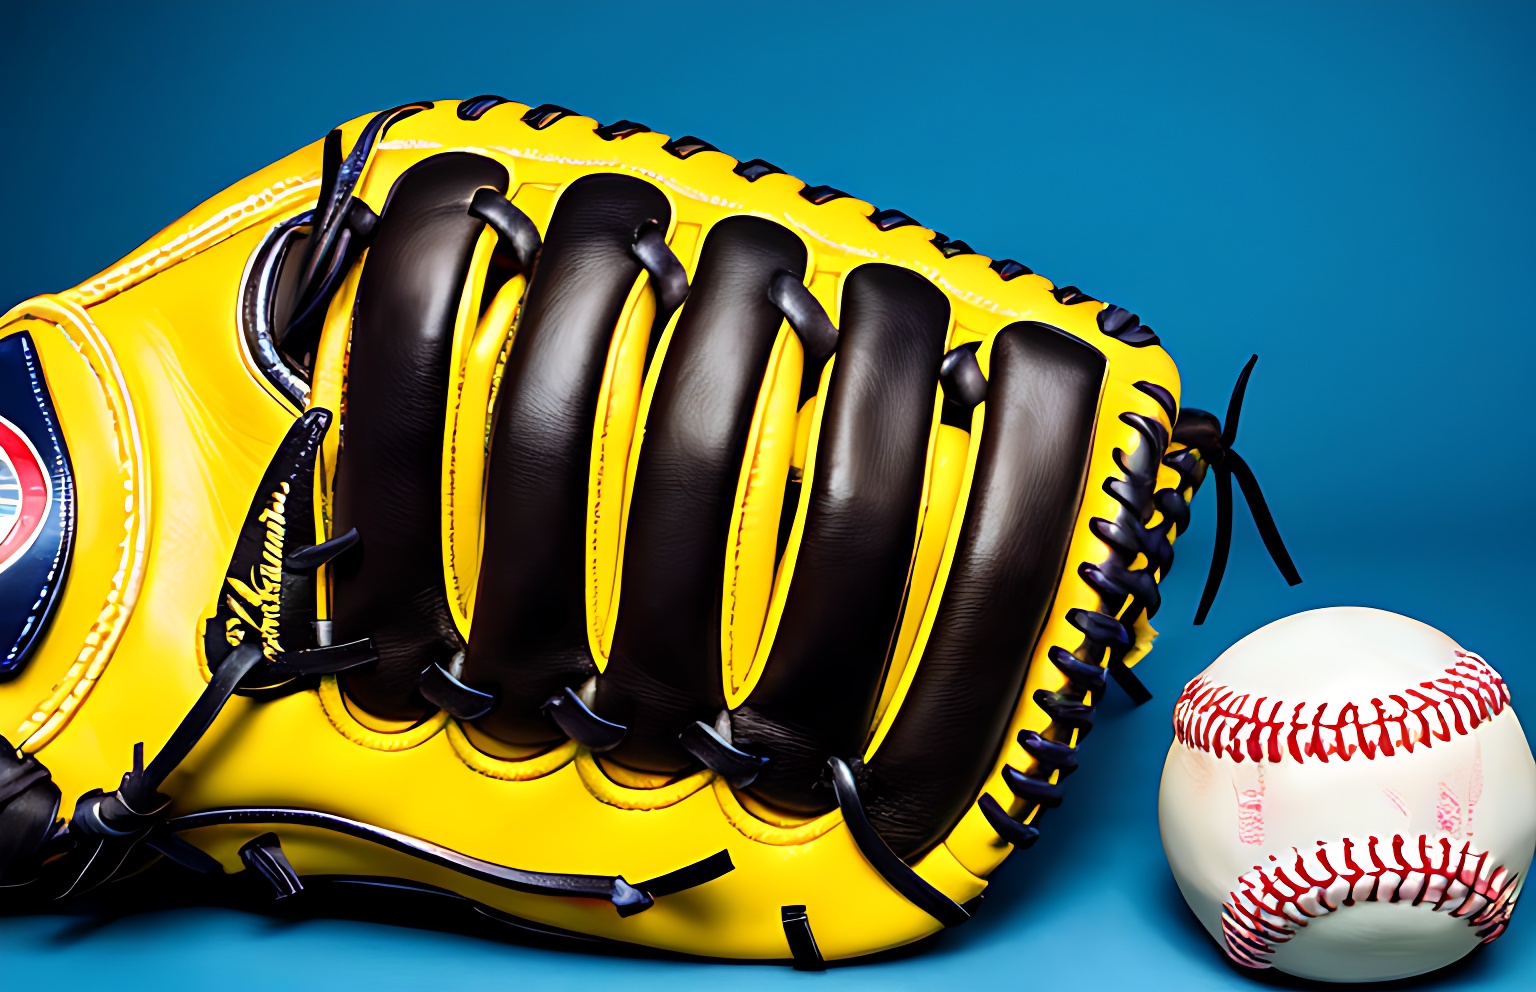 How to Restring a Baseball Glove? (A Step-by-Step Guide)